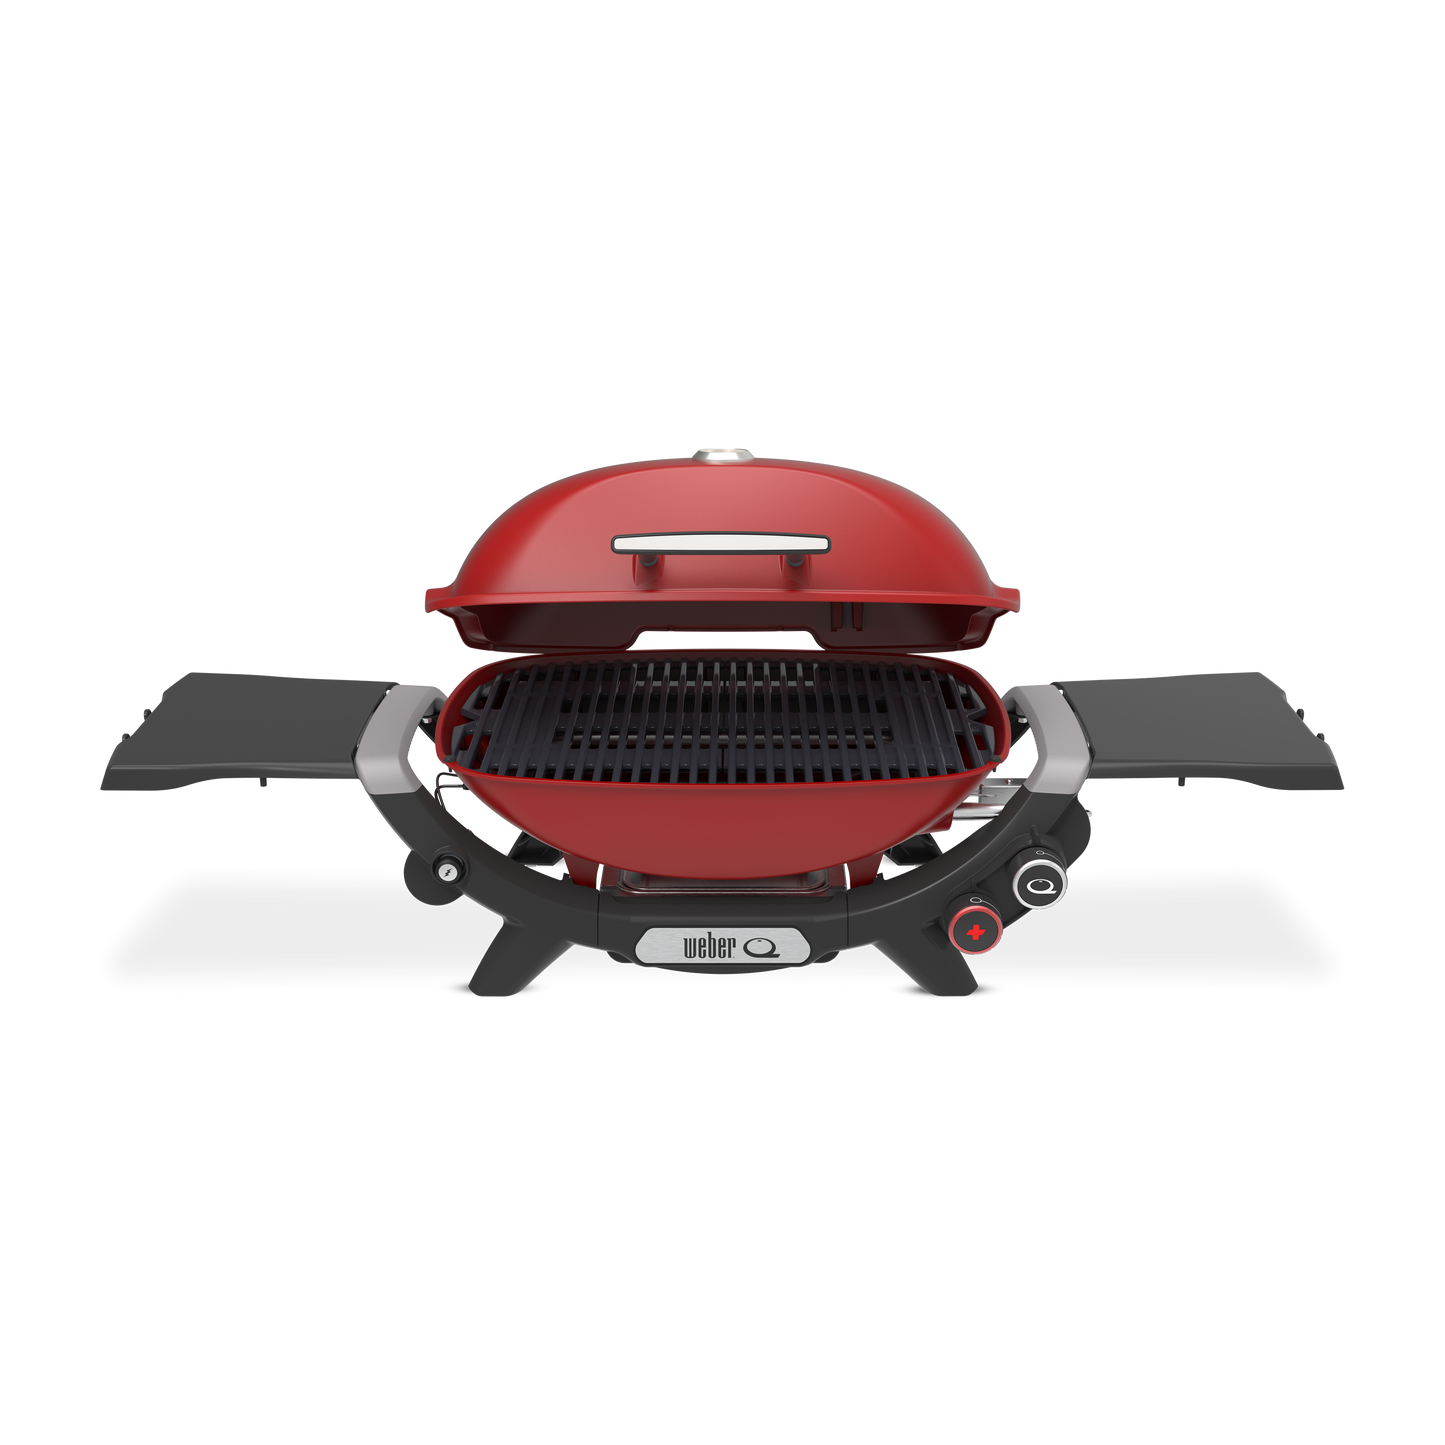 Weber Q2800N+ Portable Propane Gas Grill in Flame Red